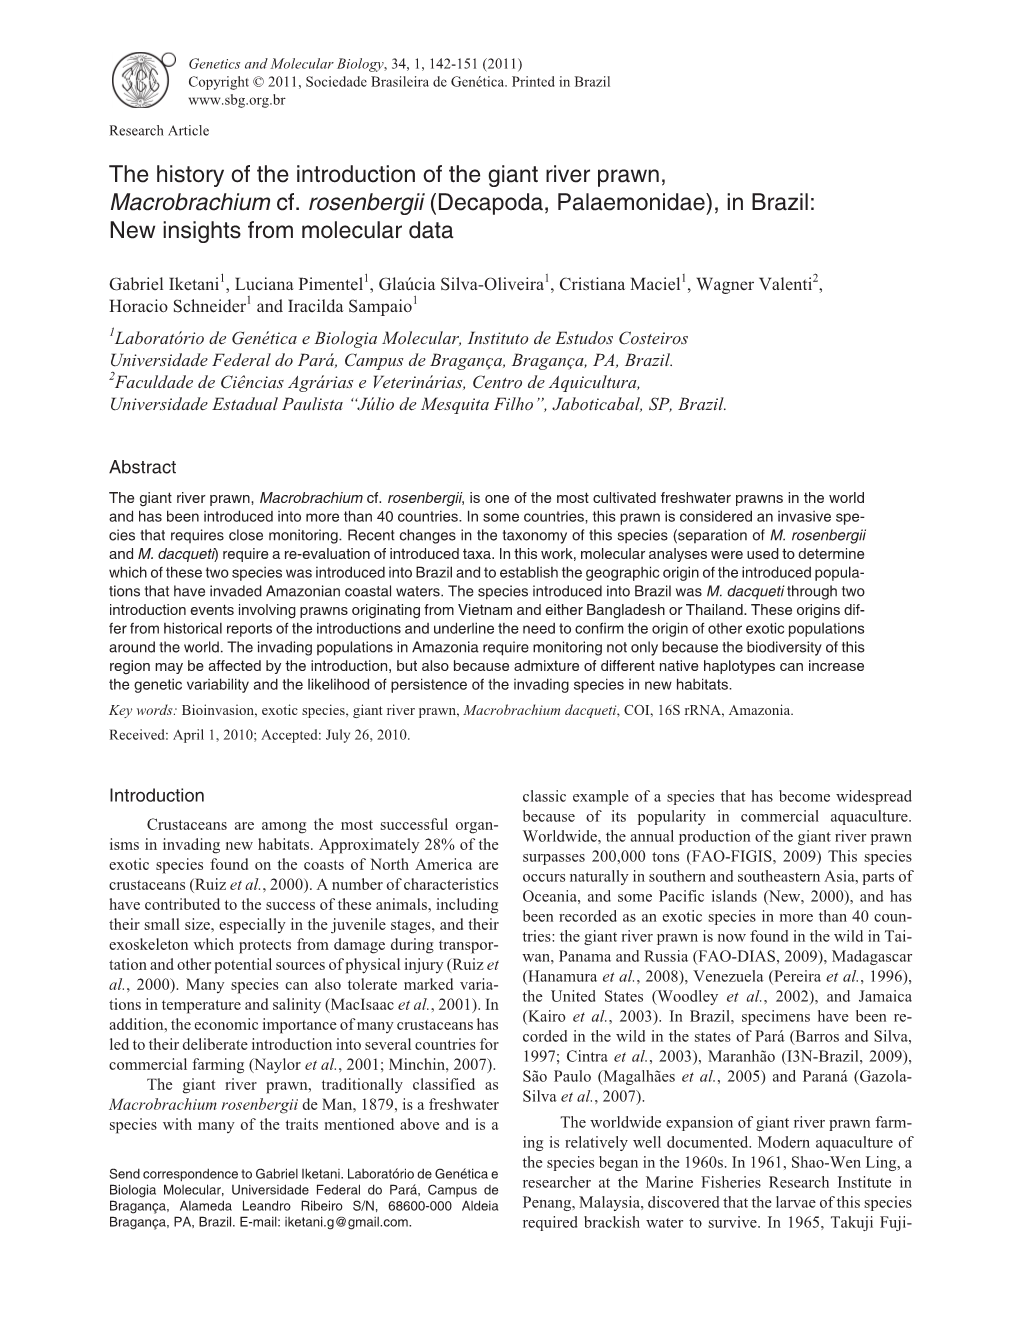 The History of the Introduction of the Giant River Prawn, Macrobrachium Cf